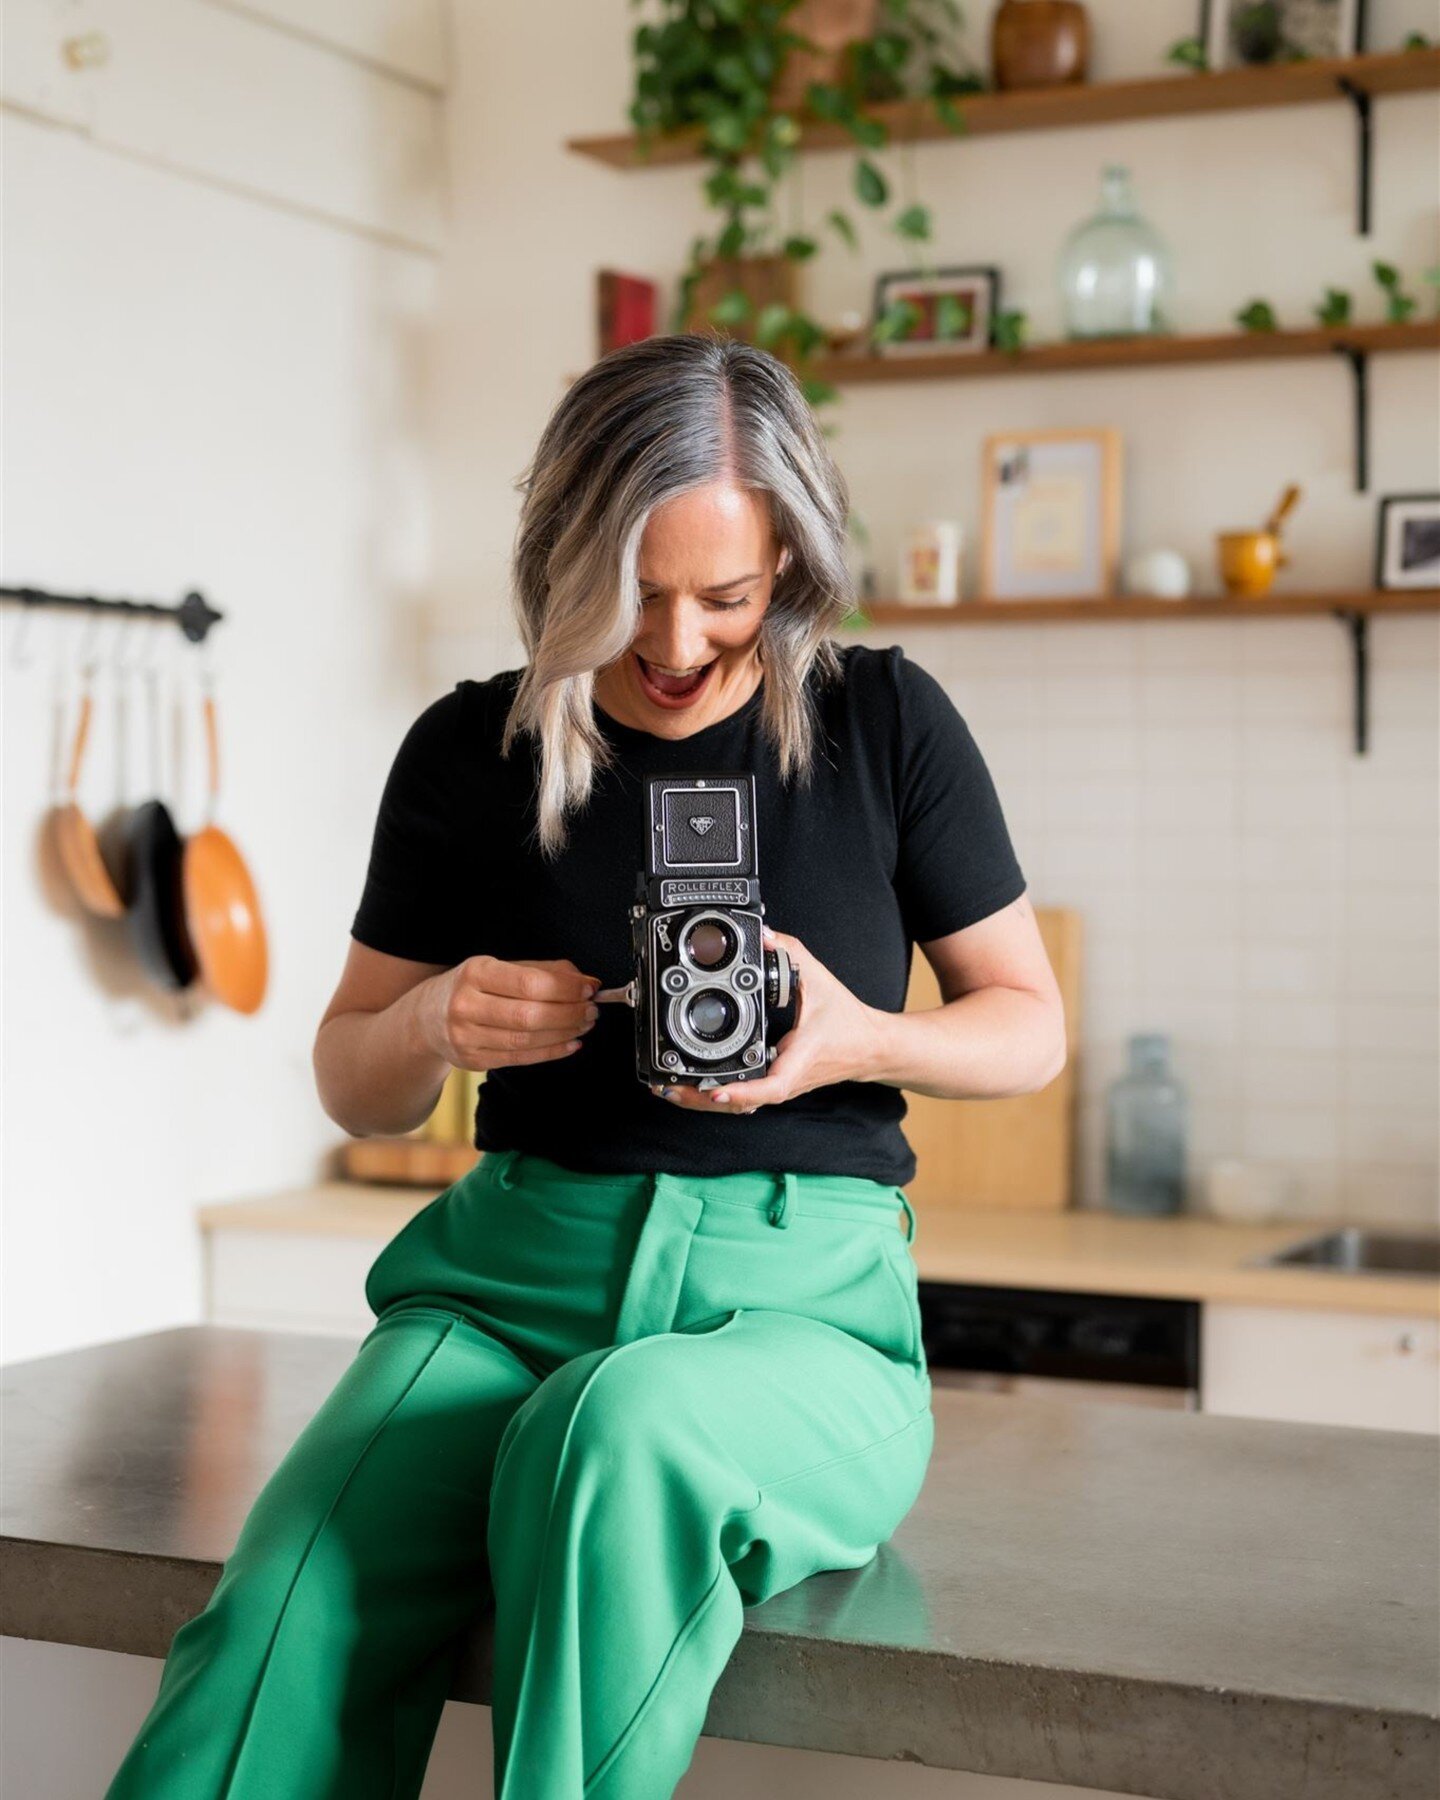 Even photographers need their own branding sessions &mdash; and the sign of a good branding session is getting more than just your headshot, but also your personality fused into the photos. 

Because let's face it &mdash; the days of simply standing 